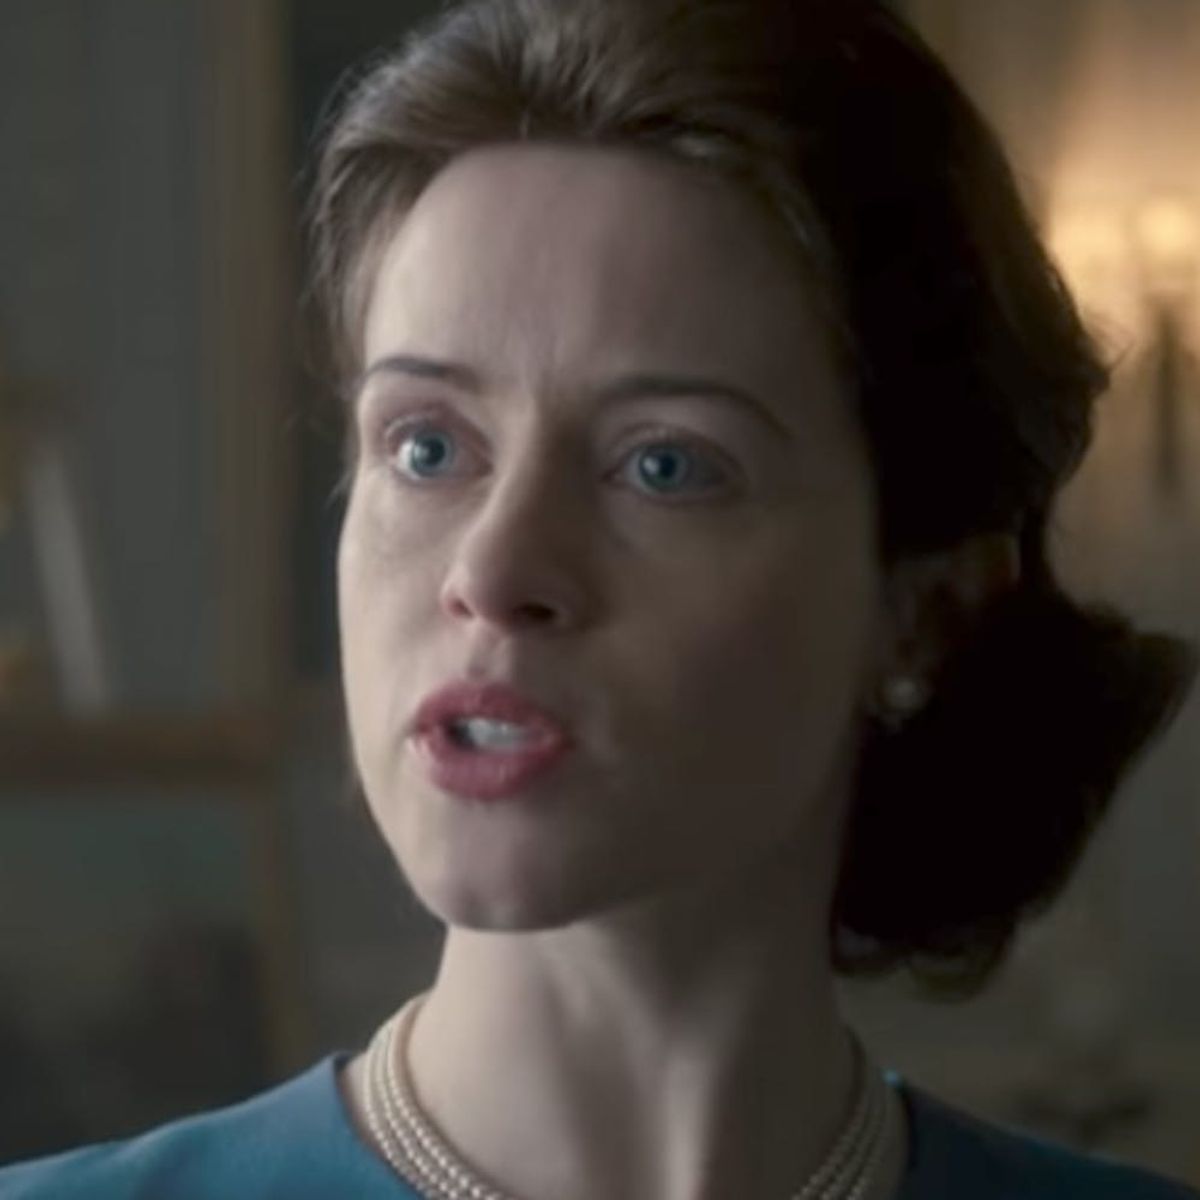 The Royals Are in Serious Turmoil in the Season 2 Trailer for “The Crown”